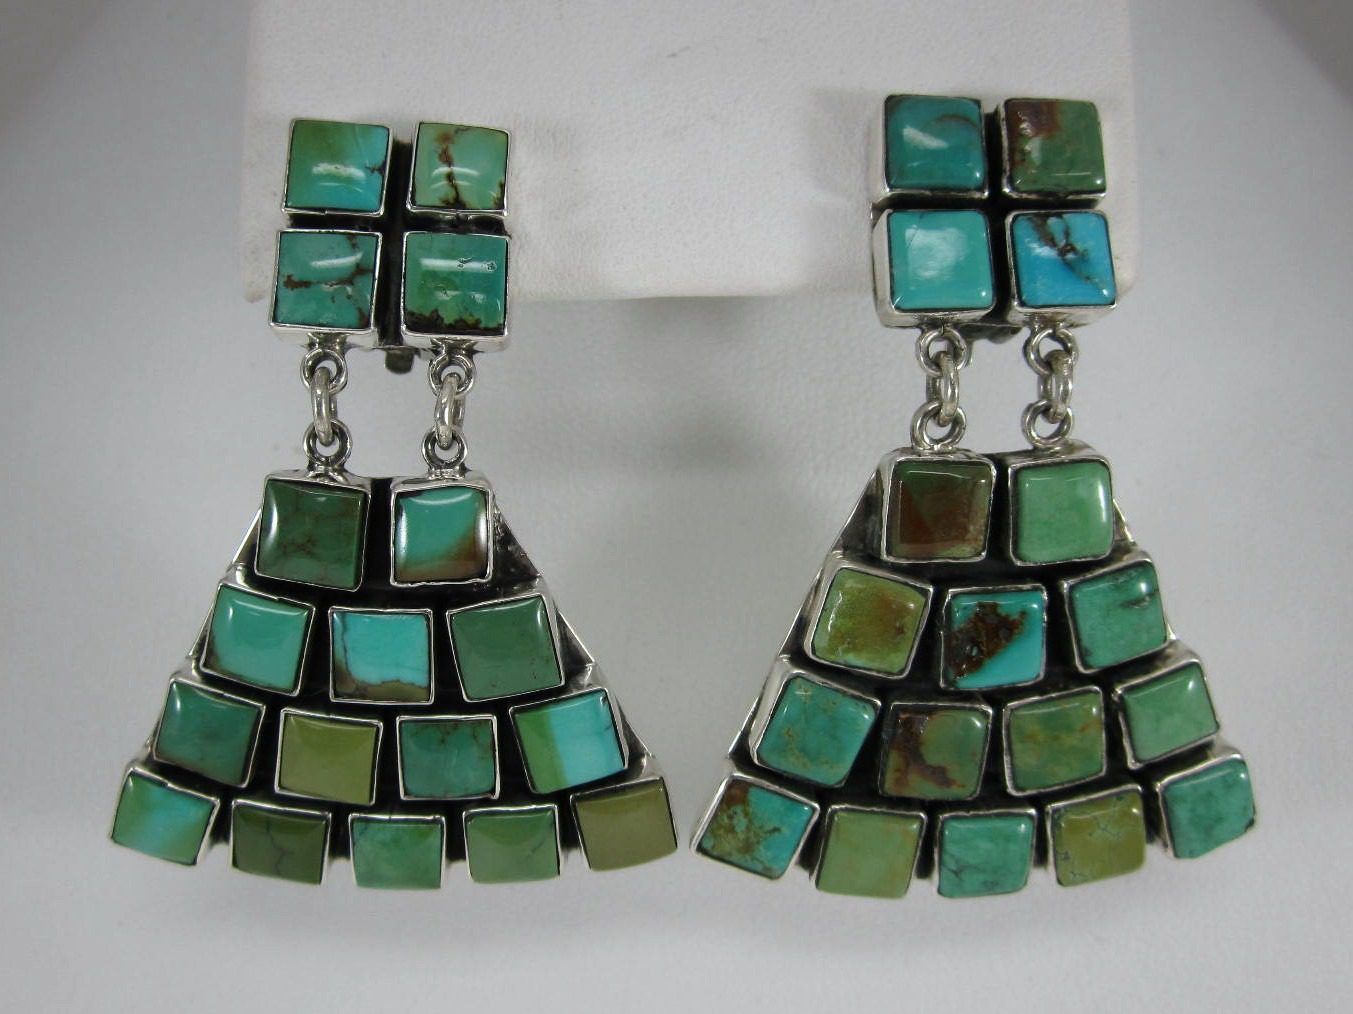 A pair of turquoise earrings hanging from the side.